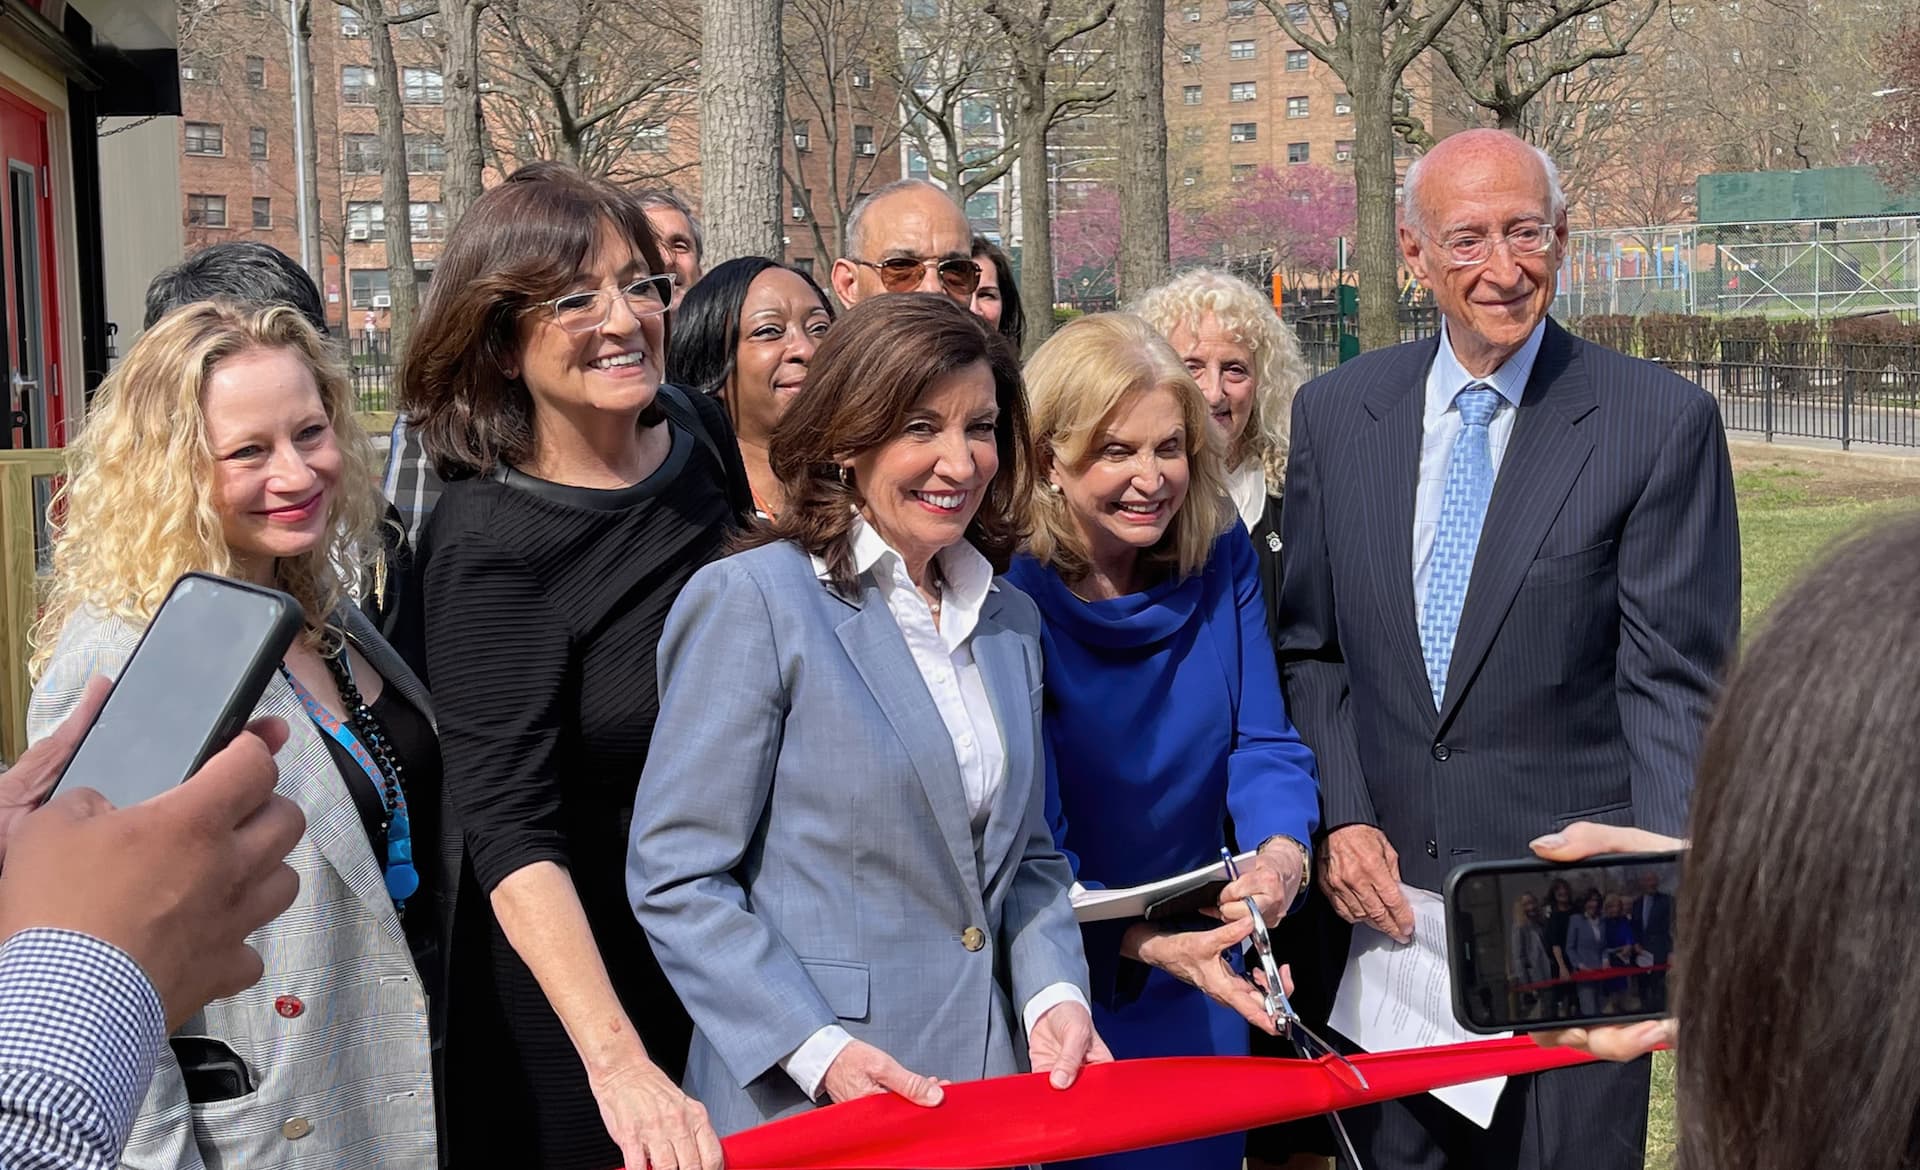 gov. hochul and rep. maloney cutting the ribbon to astoria houses covid center